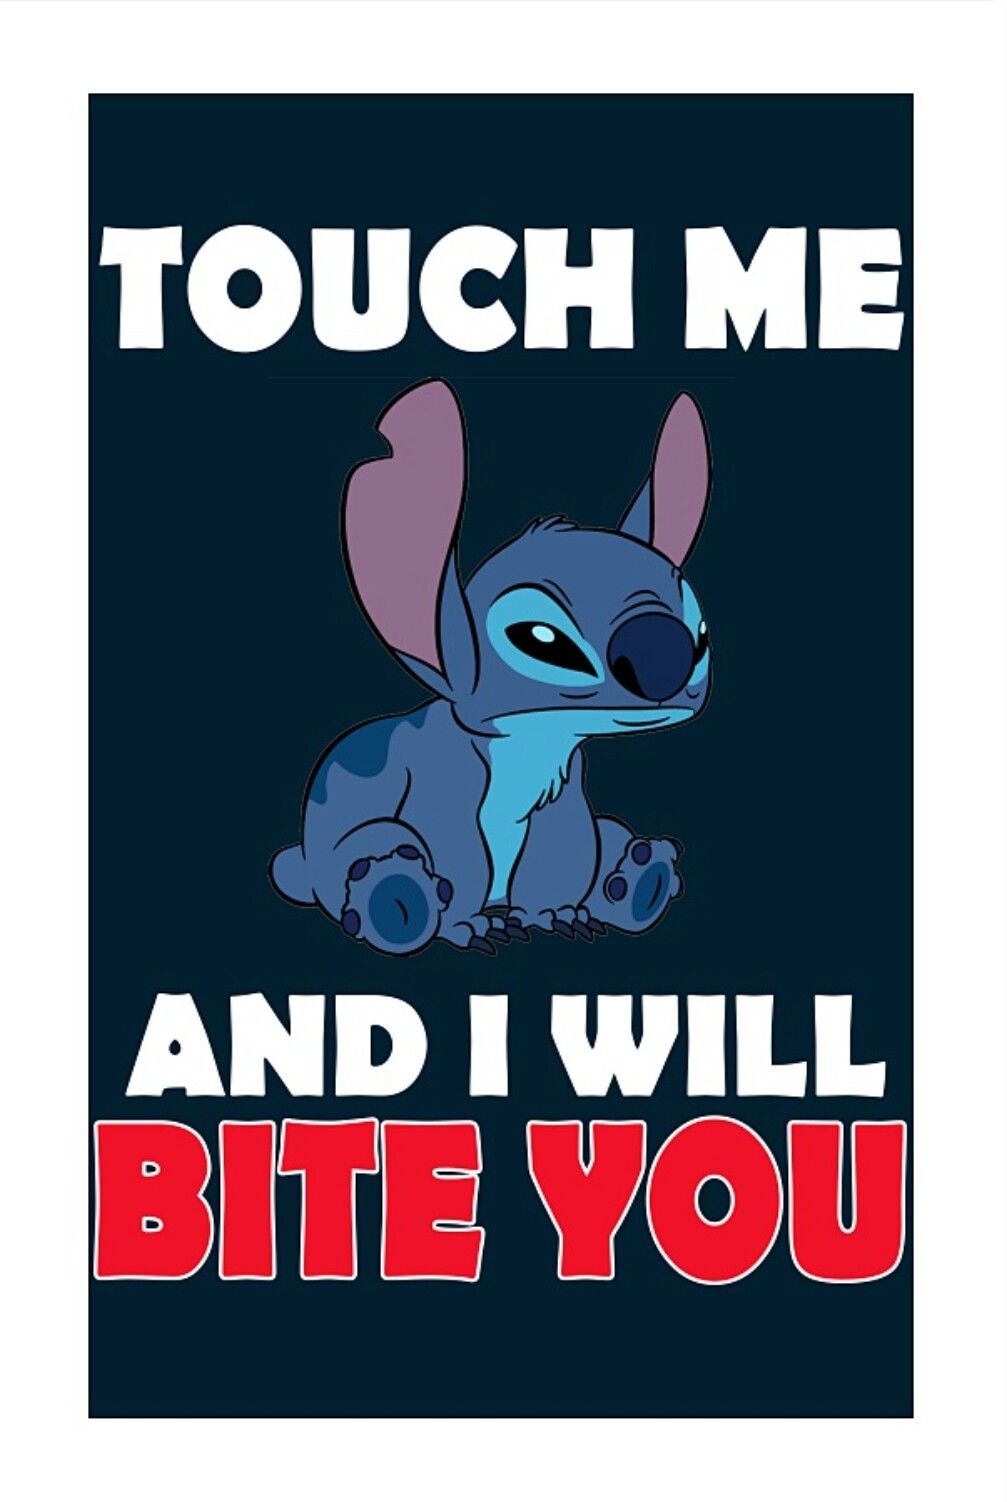 feel good messages. Lilo and stitch quotes, Lilo and stitch memes, Disney quotes funny